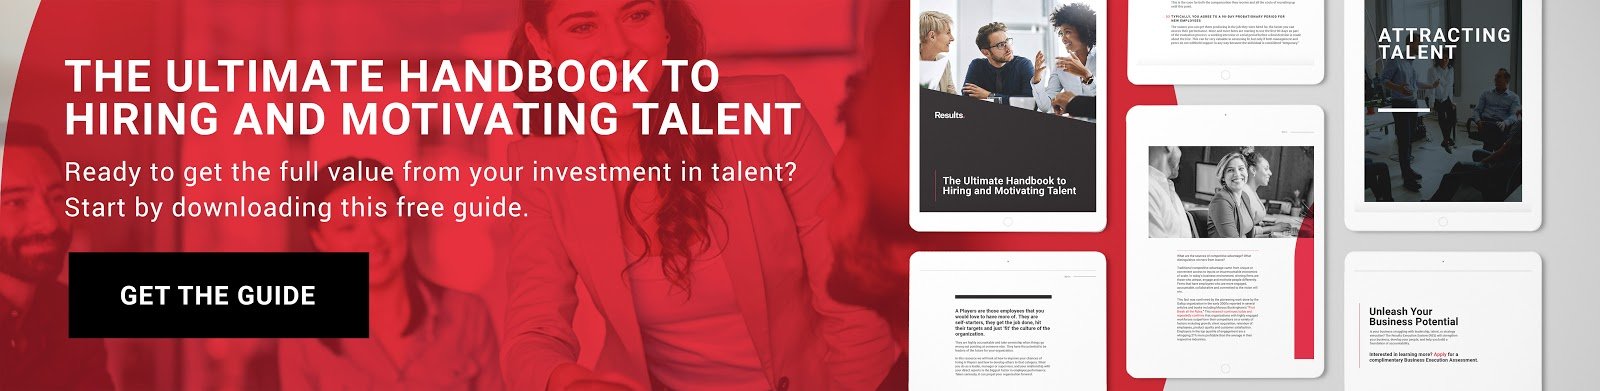 the ultimate handbook to hiring and motivating talent